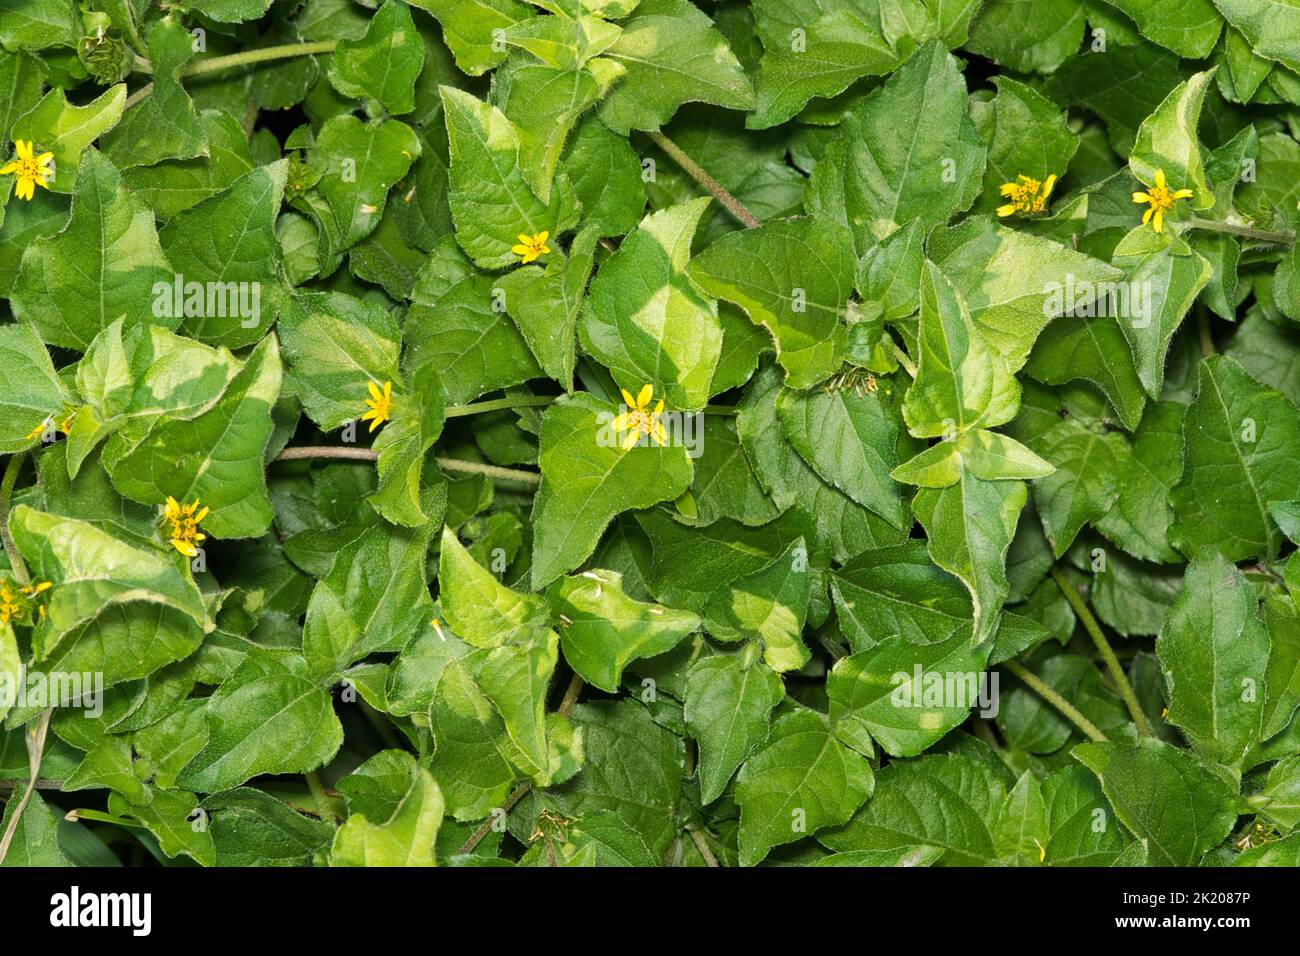 Straggler Daisy (Calyptocarpus vialis) weeds in a backyard, closeup directly above. Common ground cover plant found in the Southern USA. Stock Photo